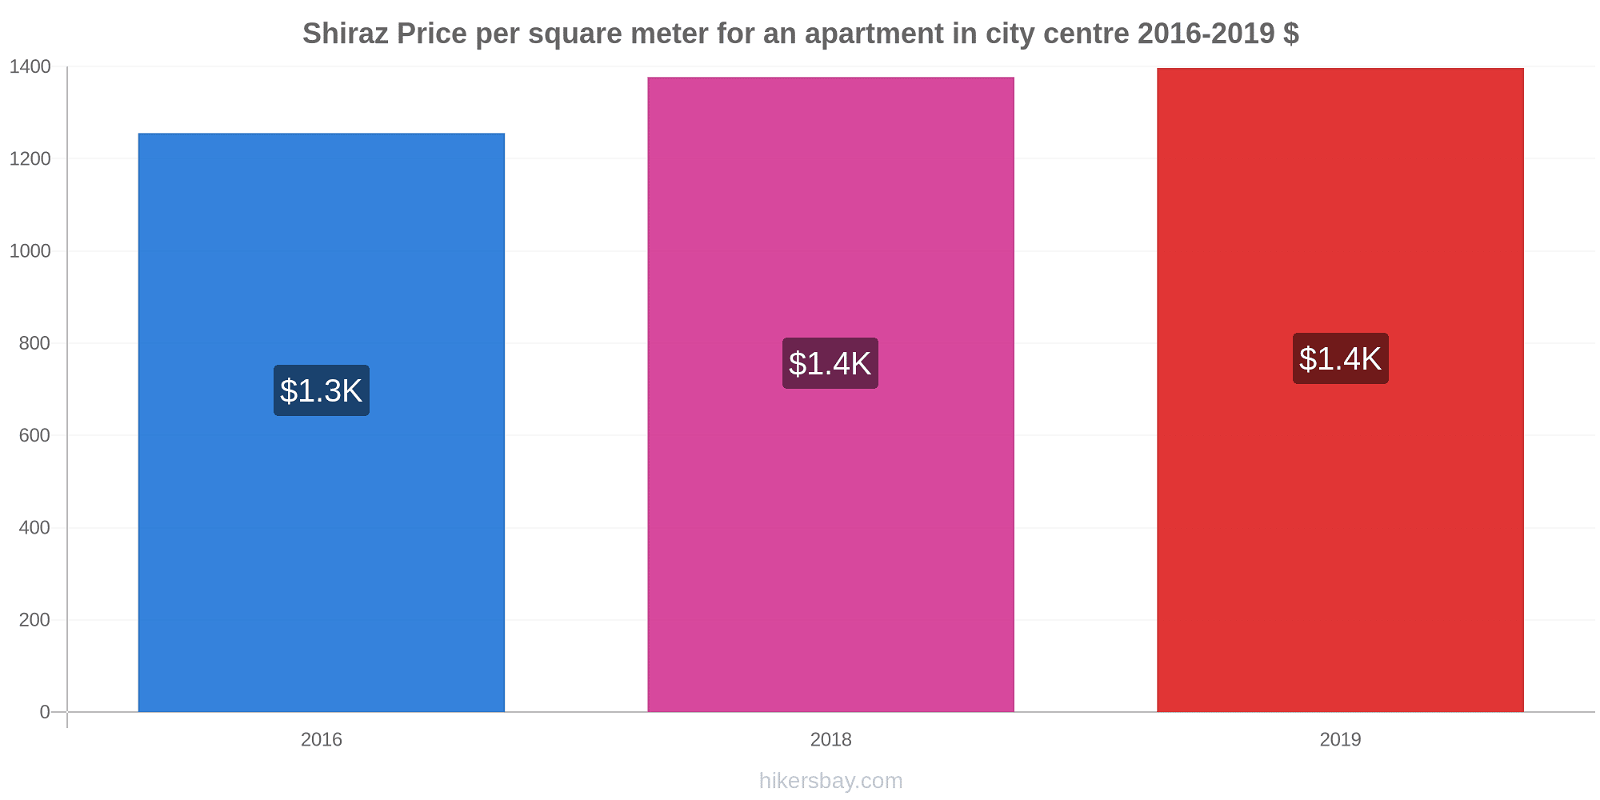 Shiraz price changes Price per square meter for an apartment in city centre hikersbay.com